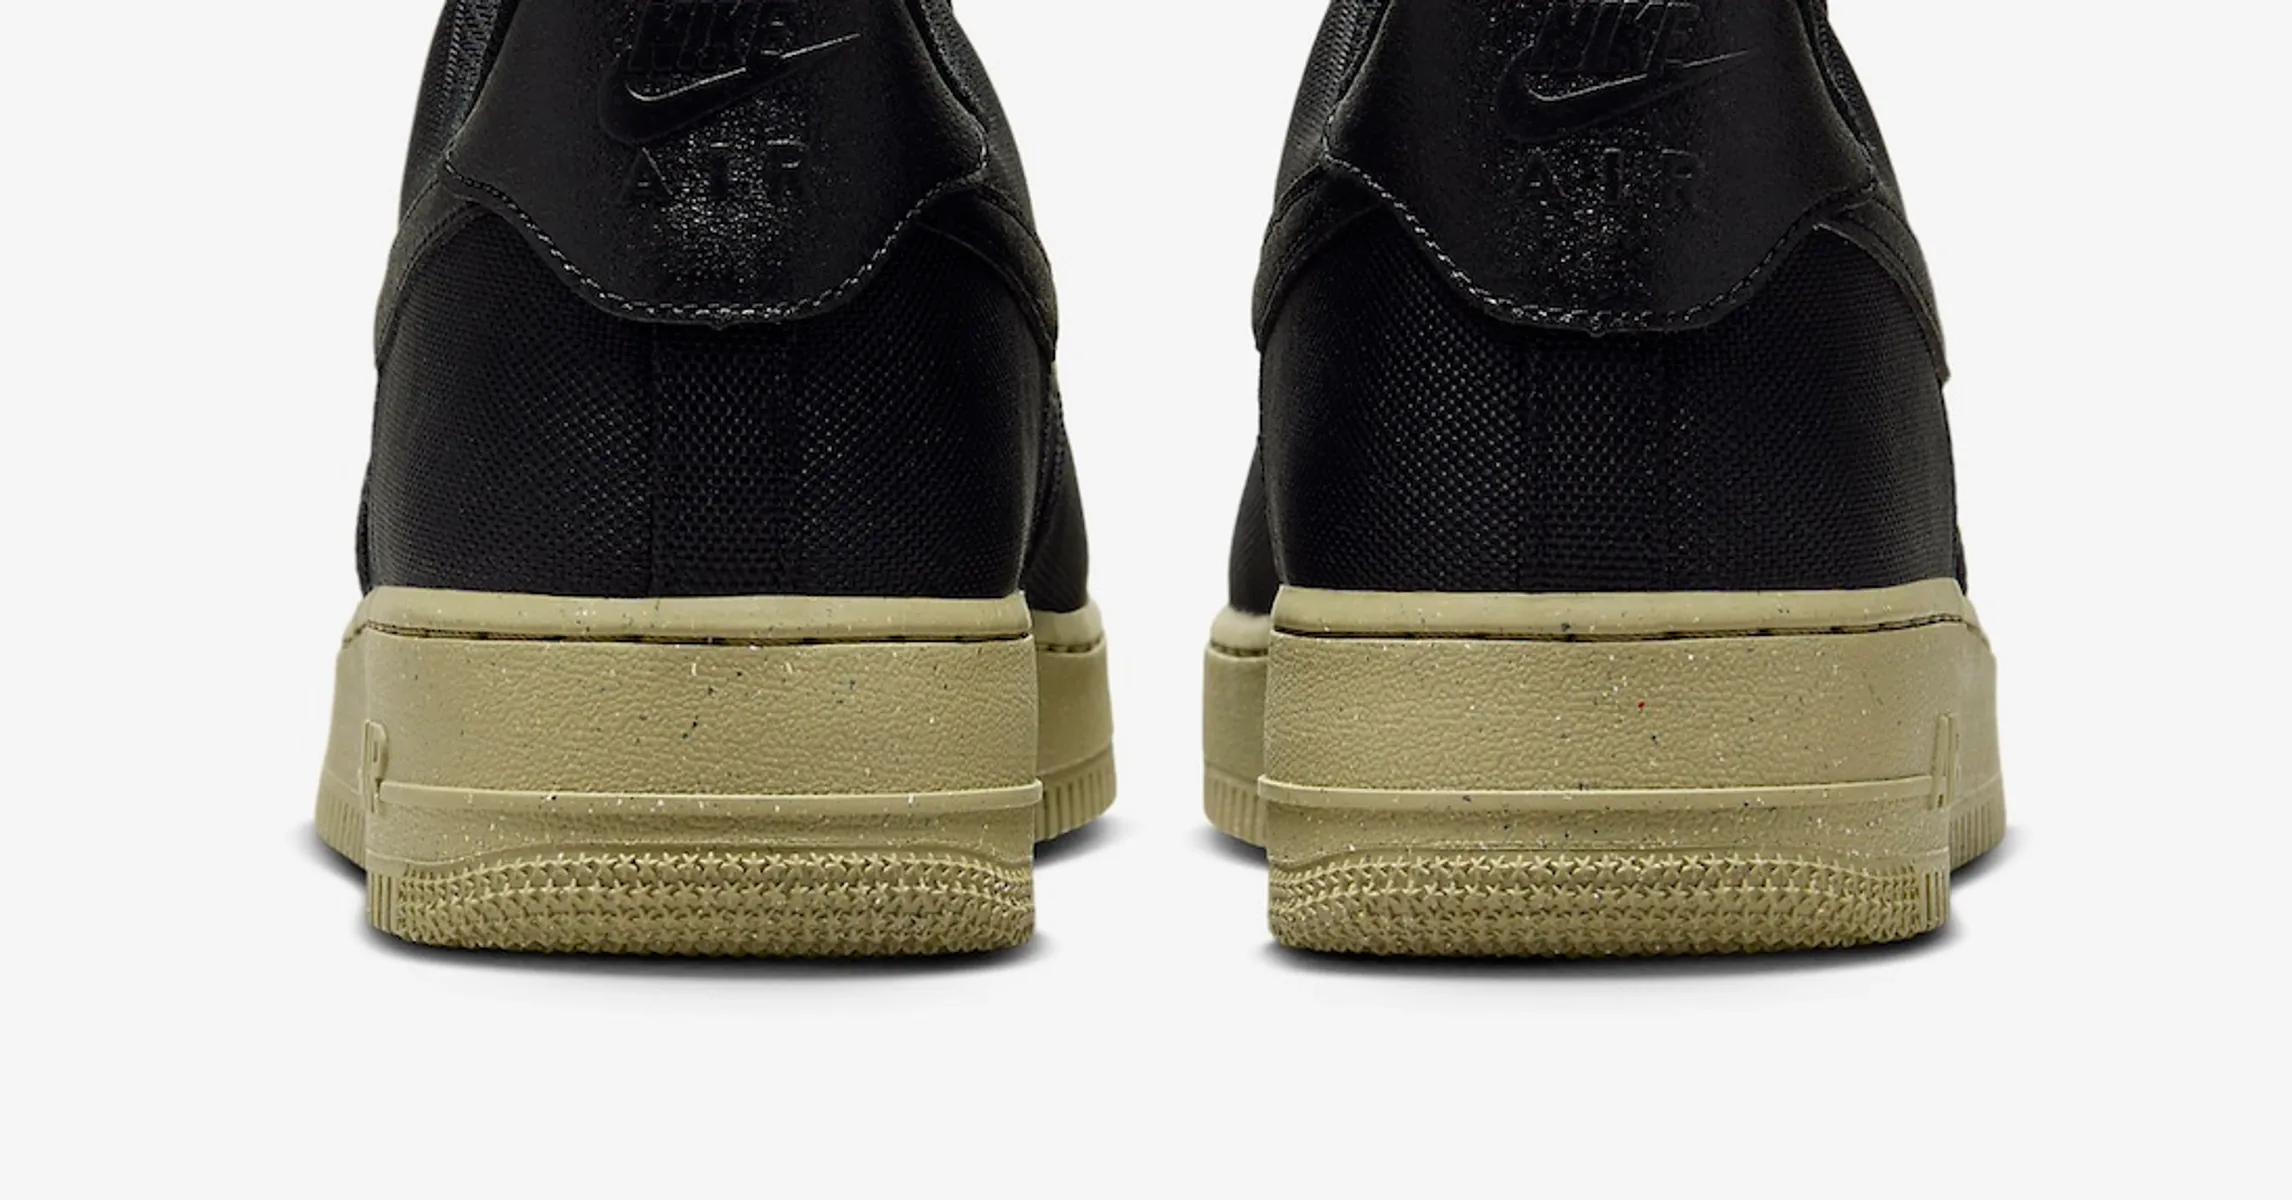 Nike Air Force 1 Low “Black Olive” Features Sustainable Materials